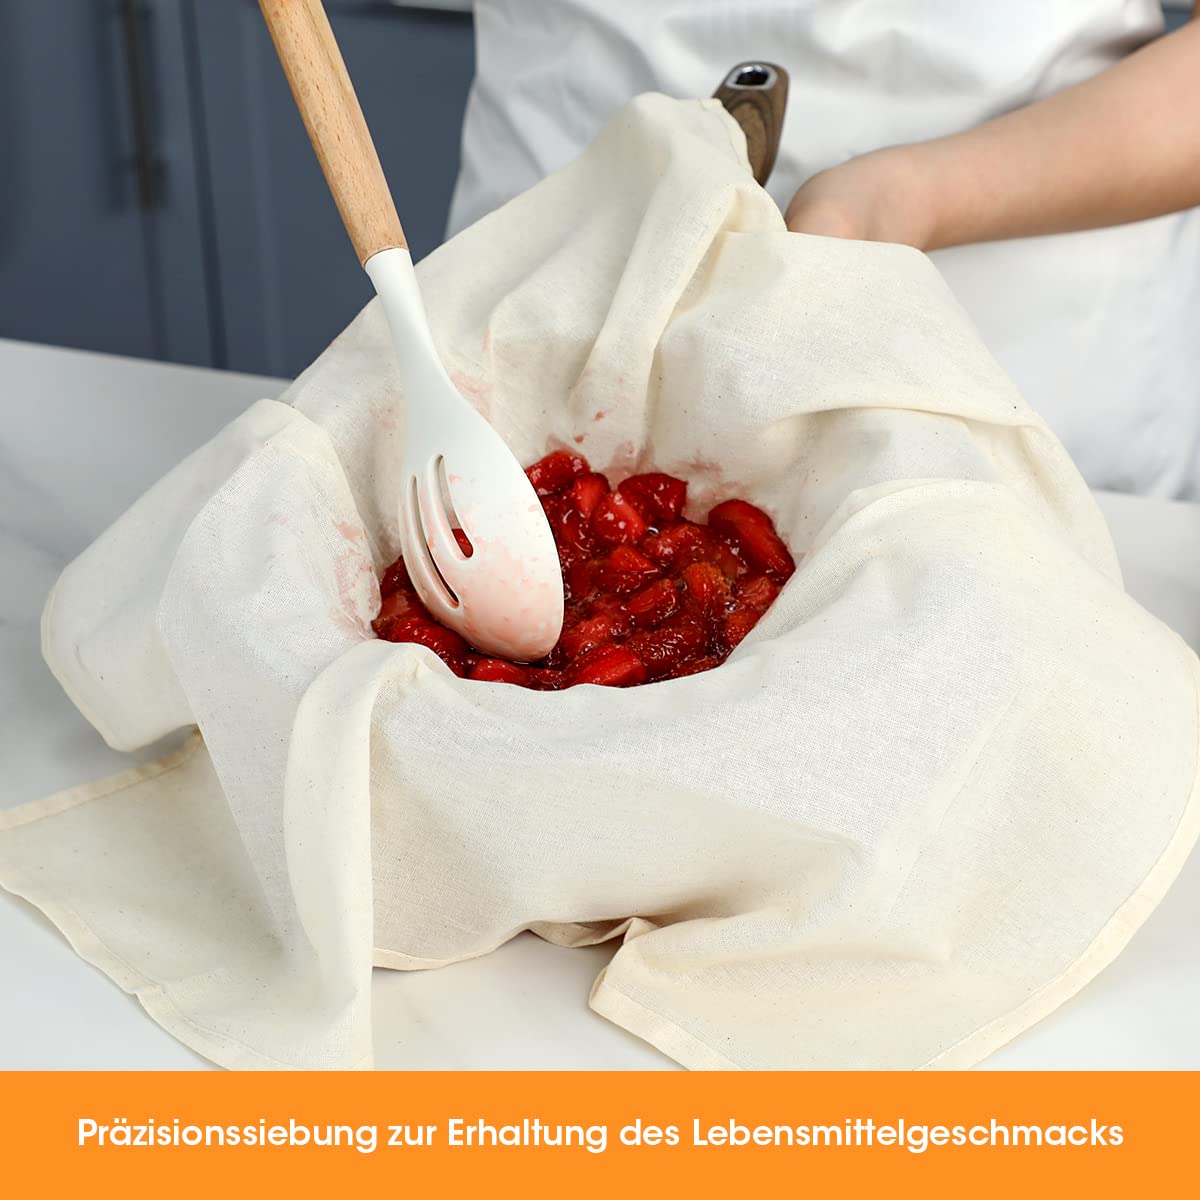  The straining cloth is made of high-quality cotton with a soft surface, comfortable to the touch and has a high tear-resistance. The strainer cloths are tasteless and unbleached.